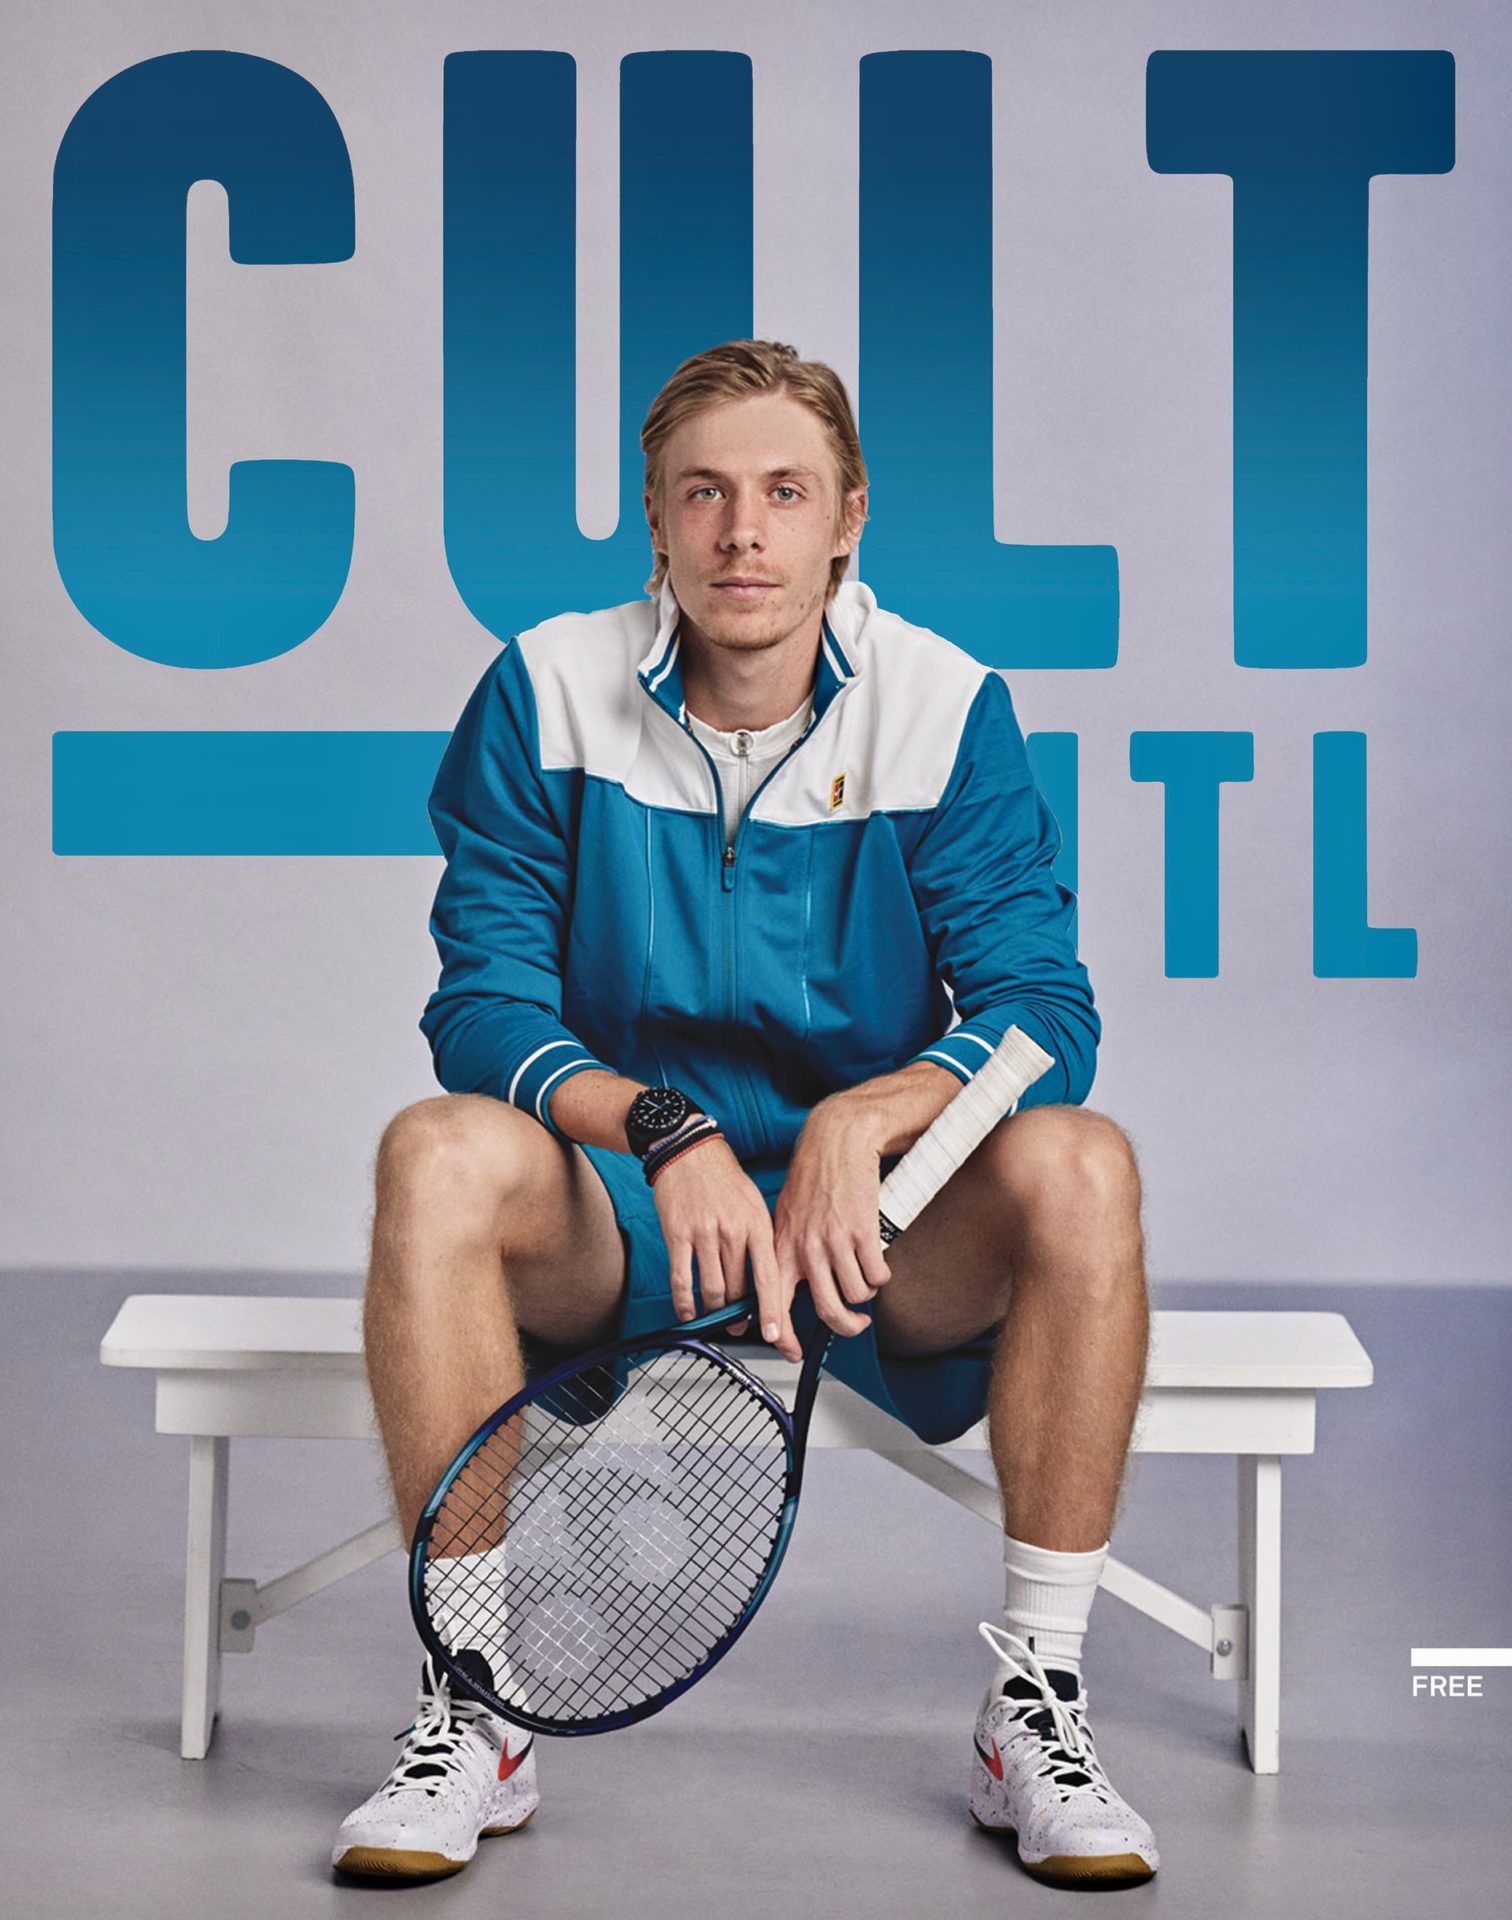 Denis Shapovalov Cult MTL Montreal cover story interview